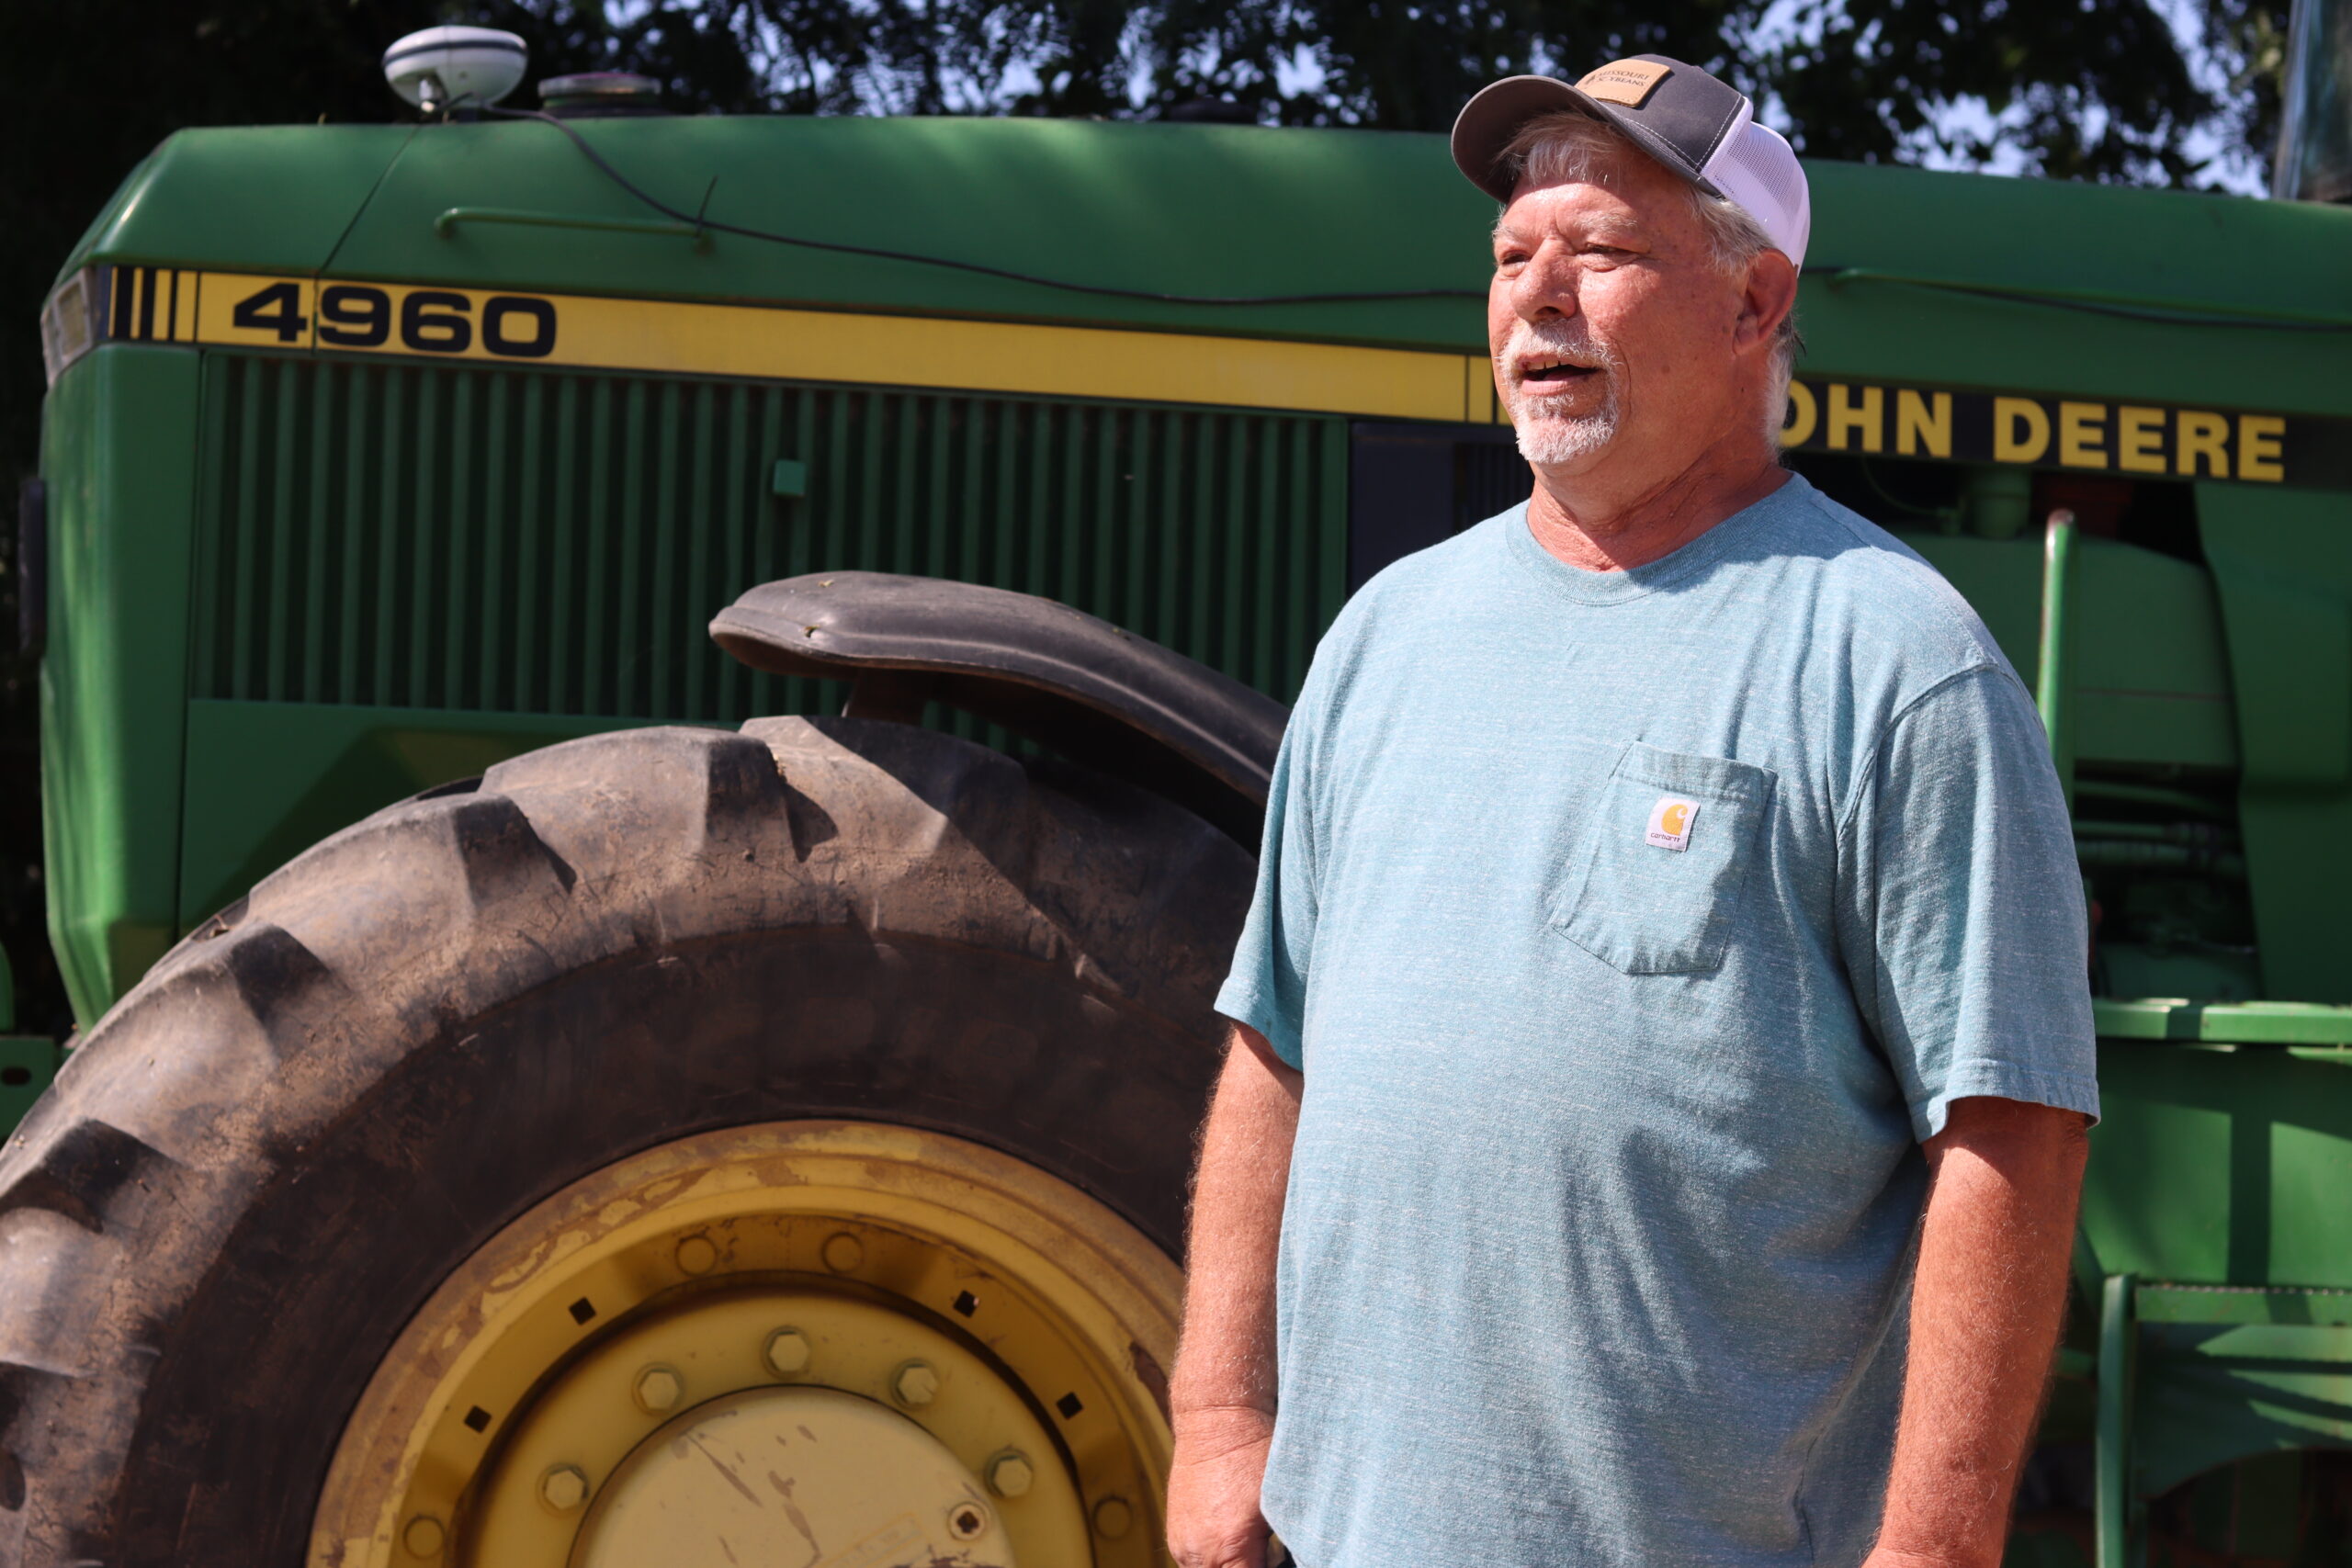 russell wolf stands in front of john deere tractor